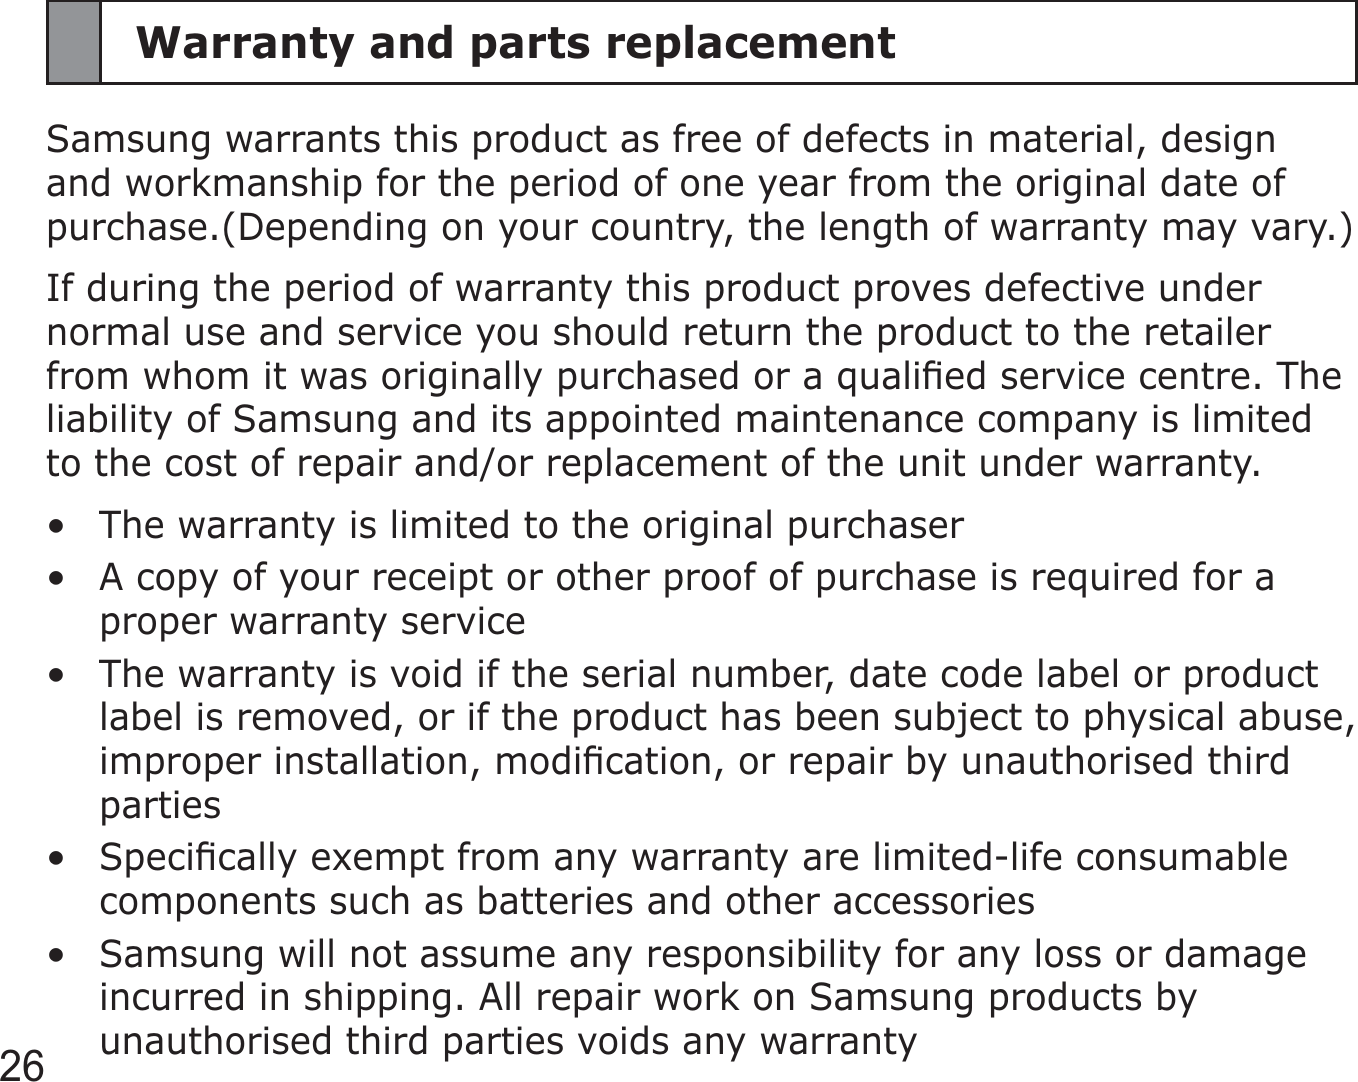 26Warranty and parts replacementSamsung warrants this product as free of defects in material, design and workmanship for the period of one year from the original date of purchase.(Depending on your country, the length of warranty may vary.)If during the period of warranty this product proves defective under normal use and service you should return the product to the retailer from whom it was originally purchased or a qualiﬁed service centre. The liability of Samsung and its appointed maintenance company is limited to the cost of repair and/or replacement of the unit under warranty.The warranty is limited to the original purchaserA copy of your receipt or other proof of purchase is required for a proper warranty serviceThe warranty is void if the serial number, date code label or product label is removed, or if the product has been subject to physical abuse, improper installation, modiﬁcation, or repair by unauthorised third partiesSpeciﬁcally exempt from any warranty are limited-life consumable components such as batteries and other accessoriesSamsung will not assume any responsibility for any loss or damage incurred in shipping. All repair work on Samsung products by unauthorised third parties voids any warranty•••••